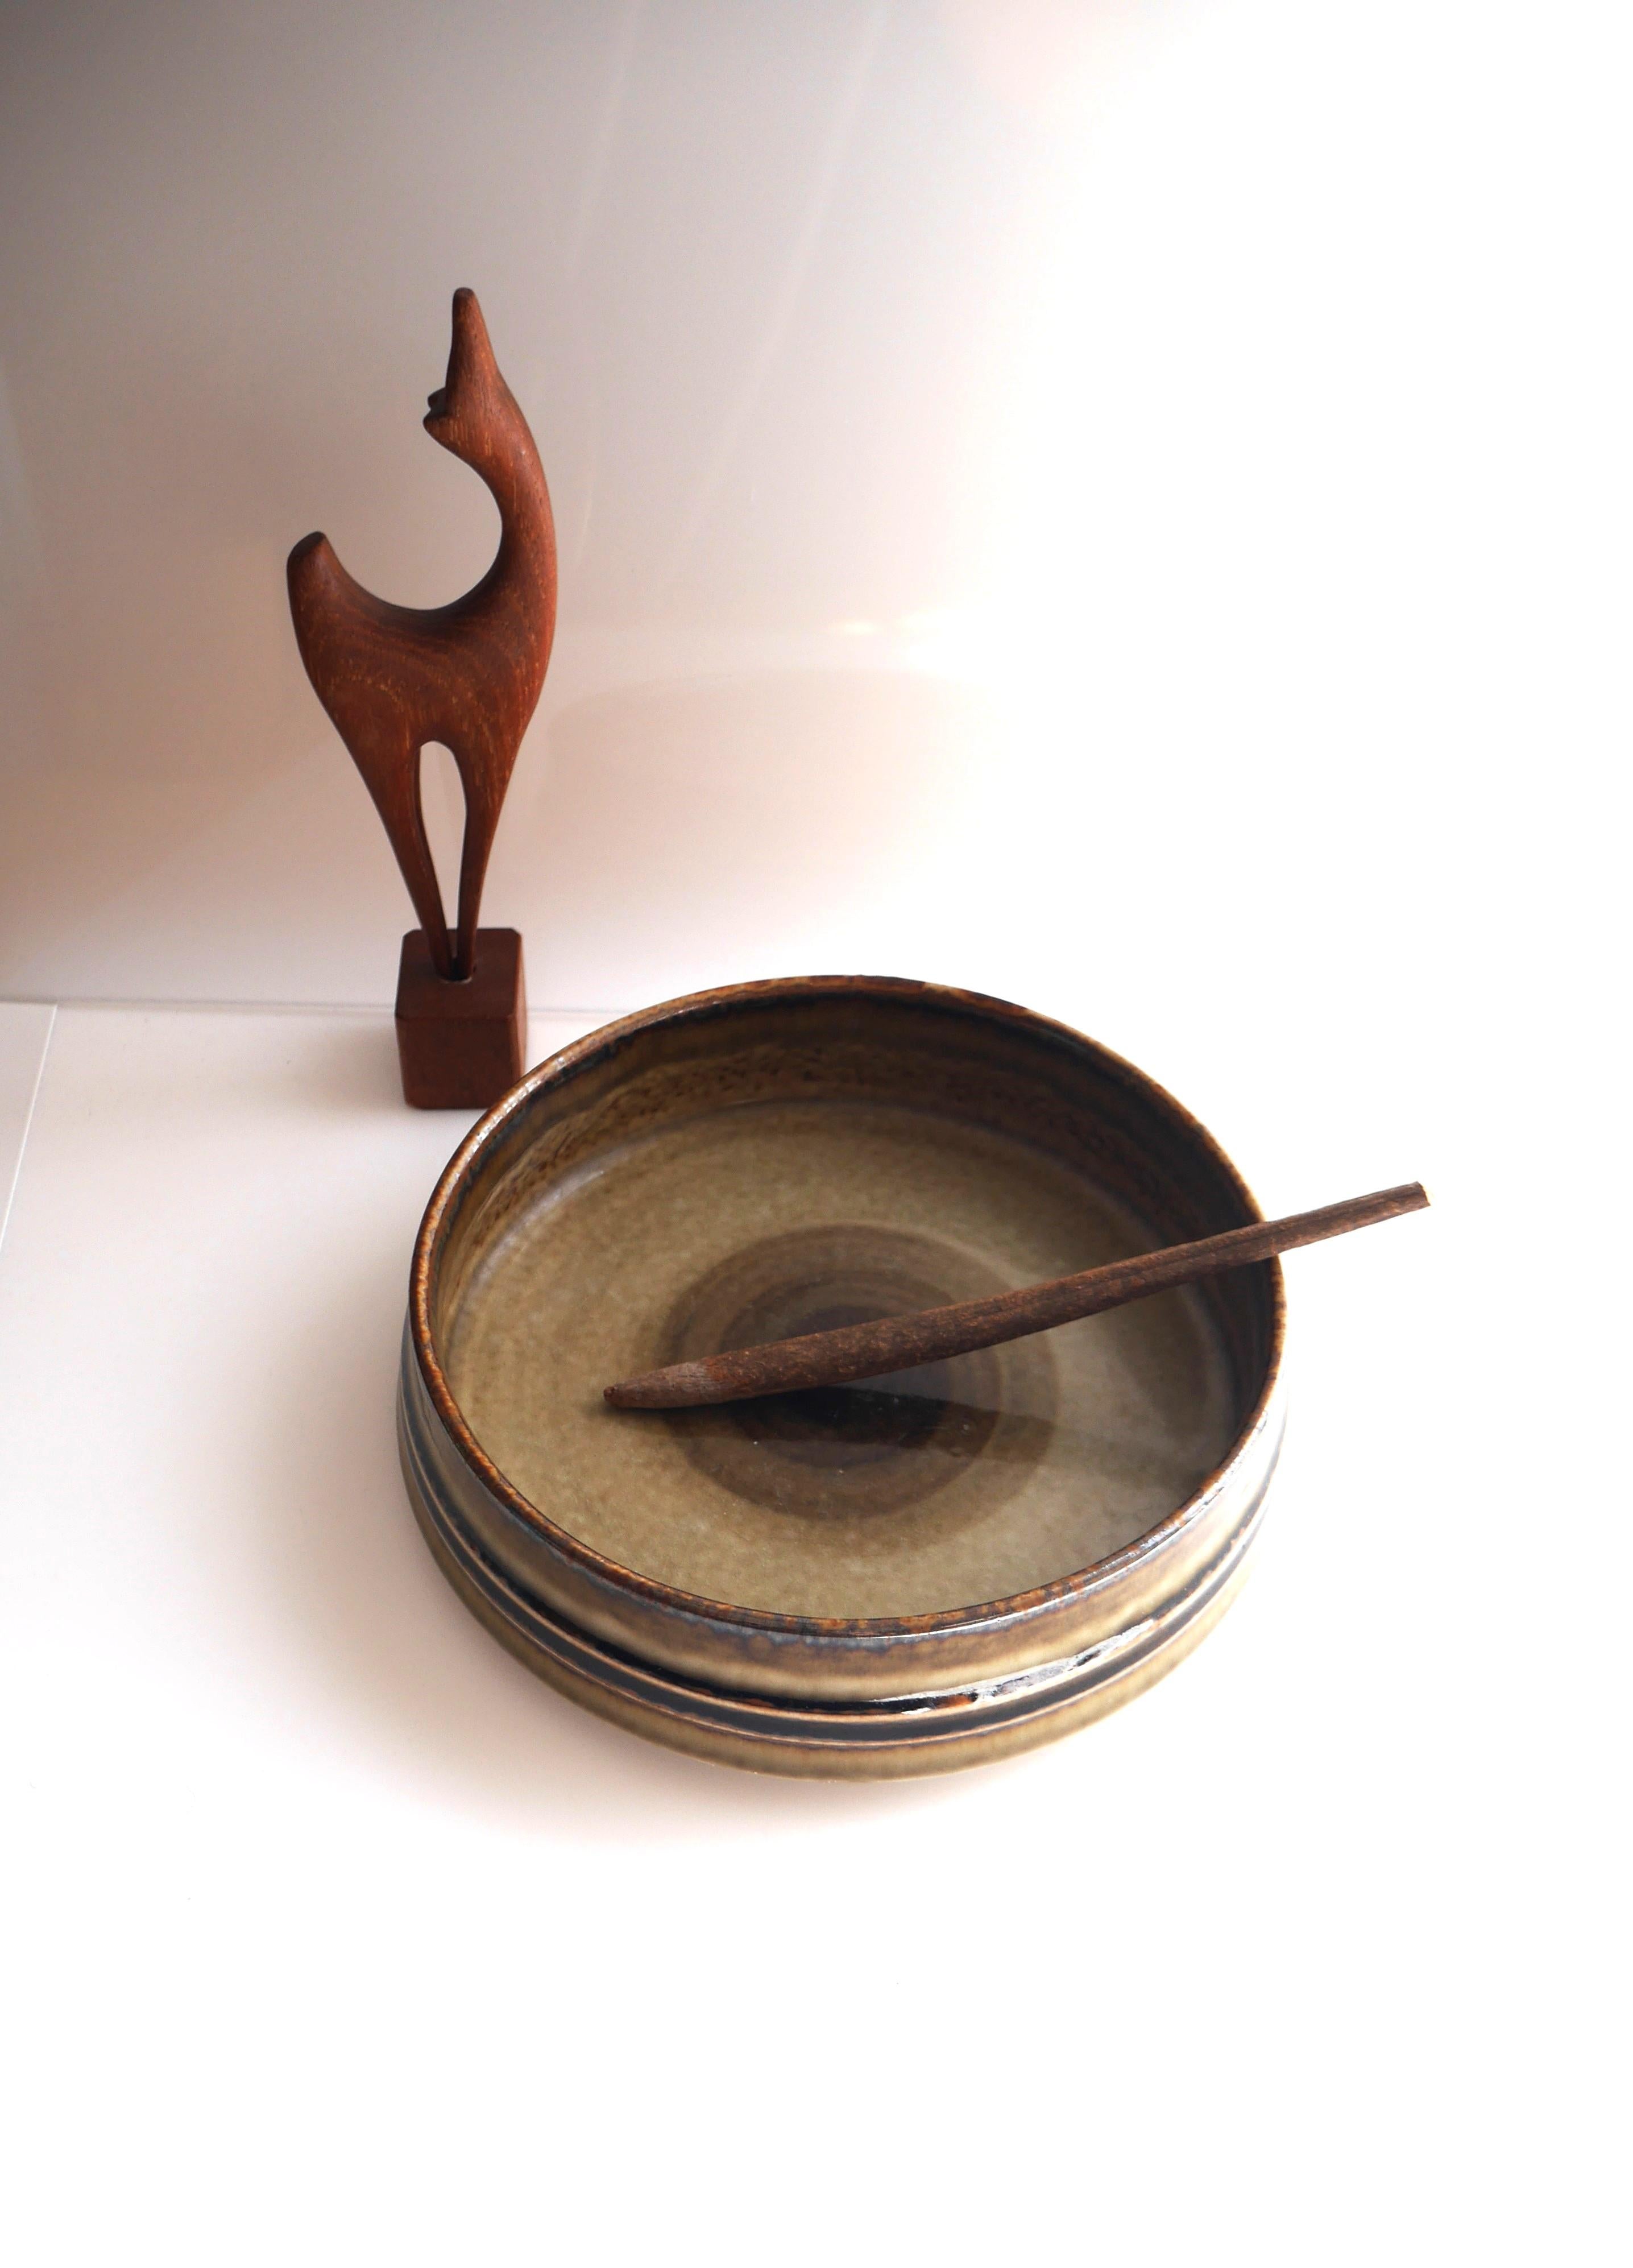 Mid-century modern pottery bowl, known as 